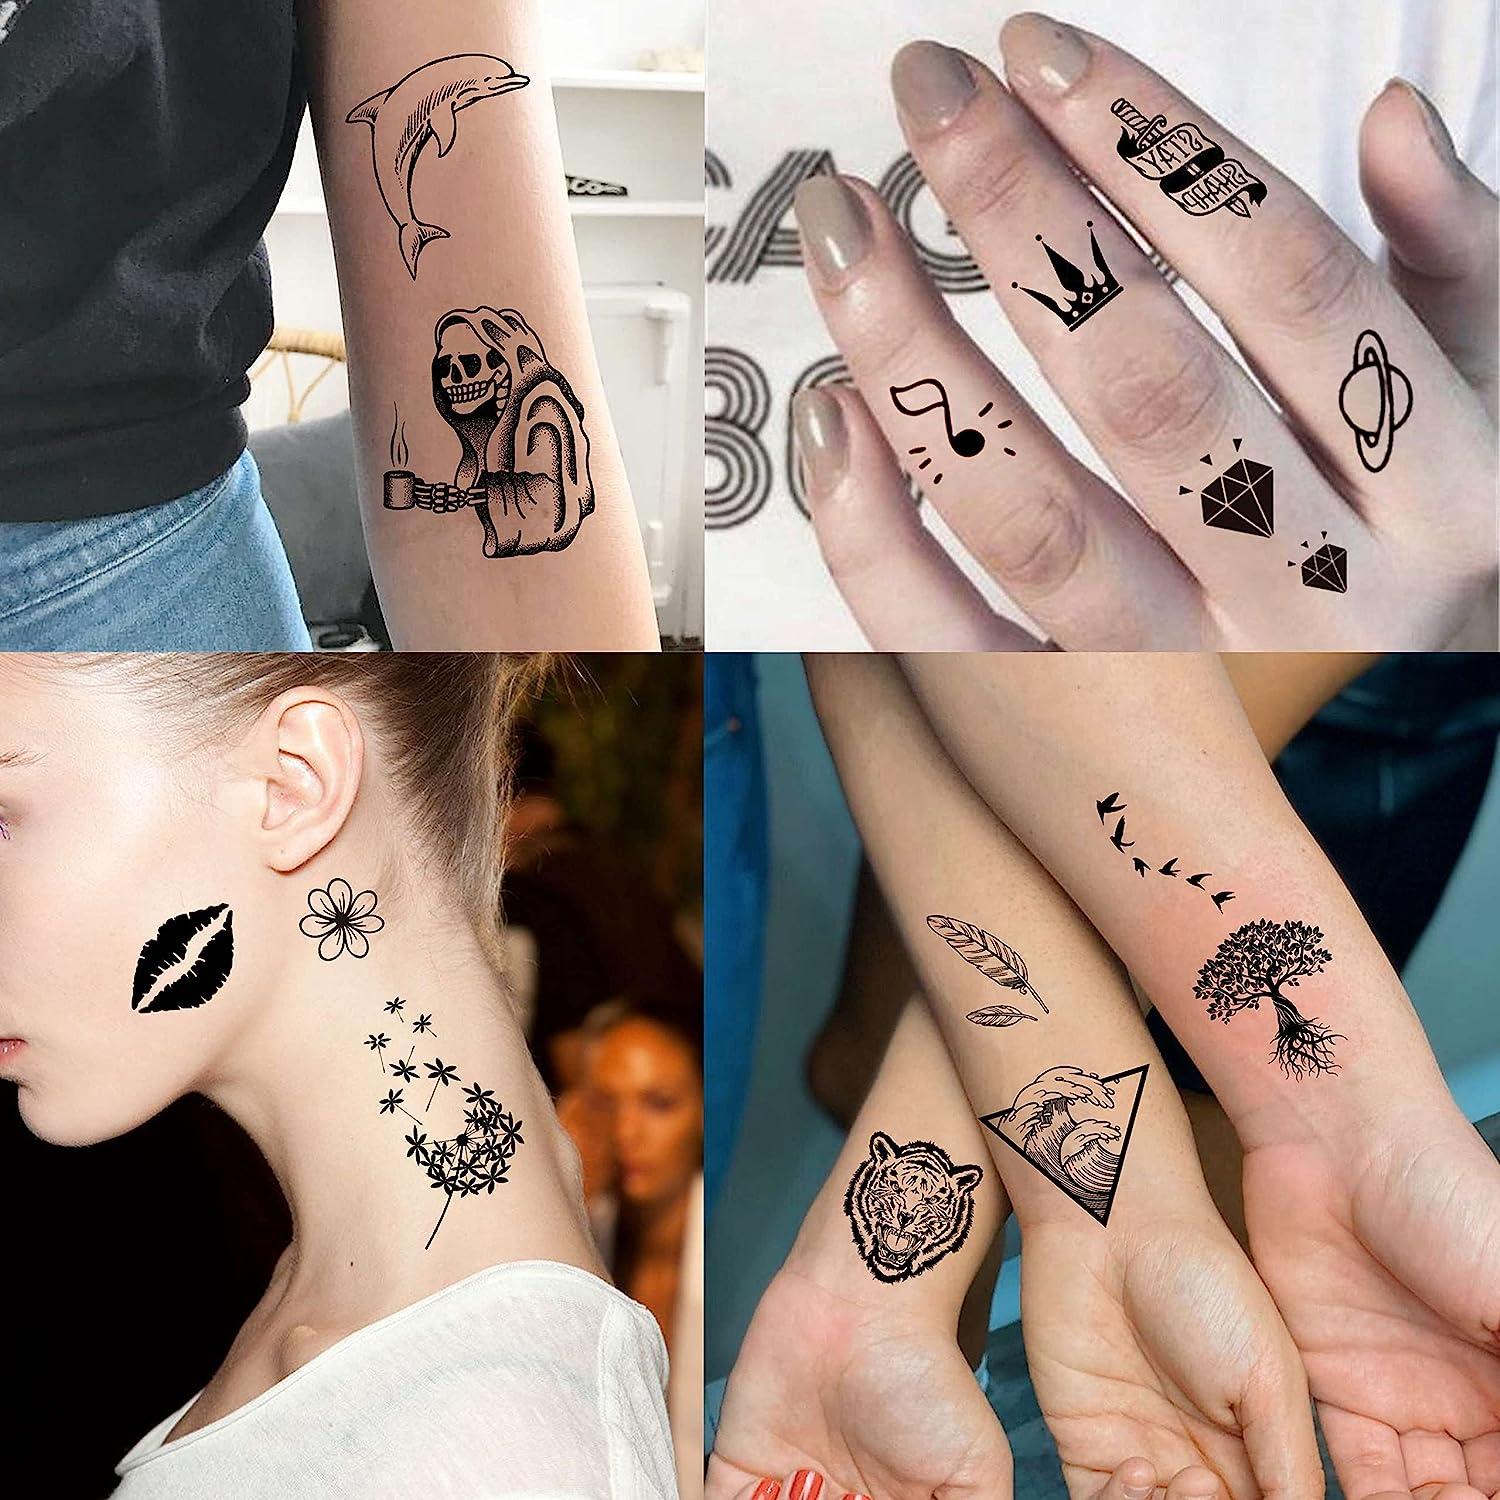 Pin by 𝚃𝚑𝚎 𝙱𝚛𝚊𝚗𝚍 ✩ on PFinds🫶🏾 | Small face tattoos, Face tattoos  for women, Face tattoos